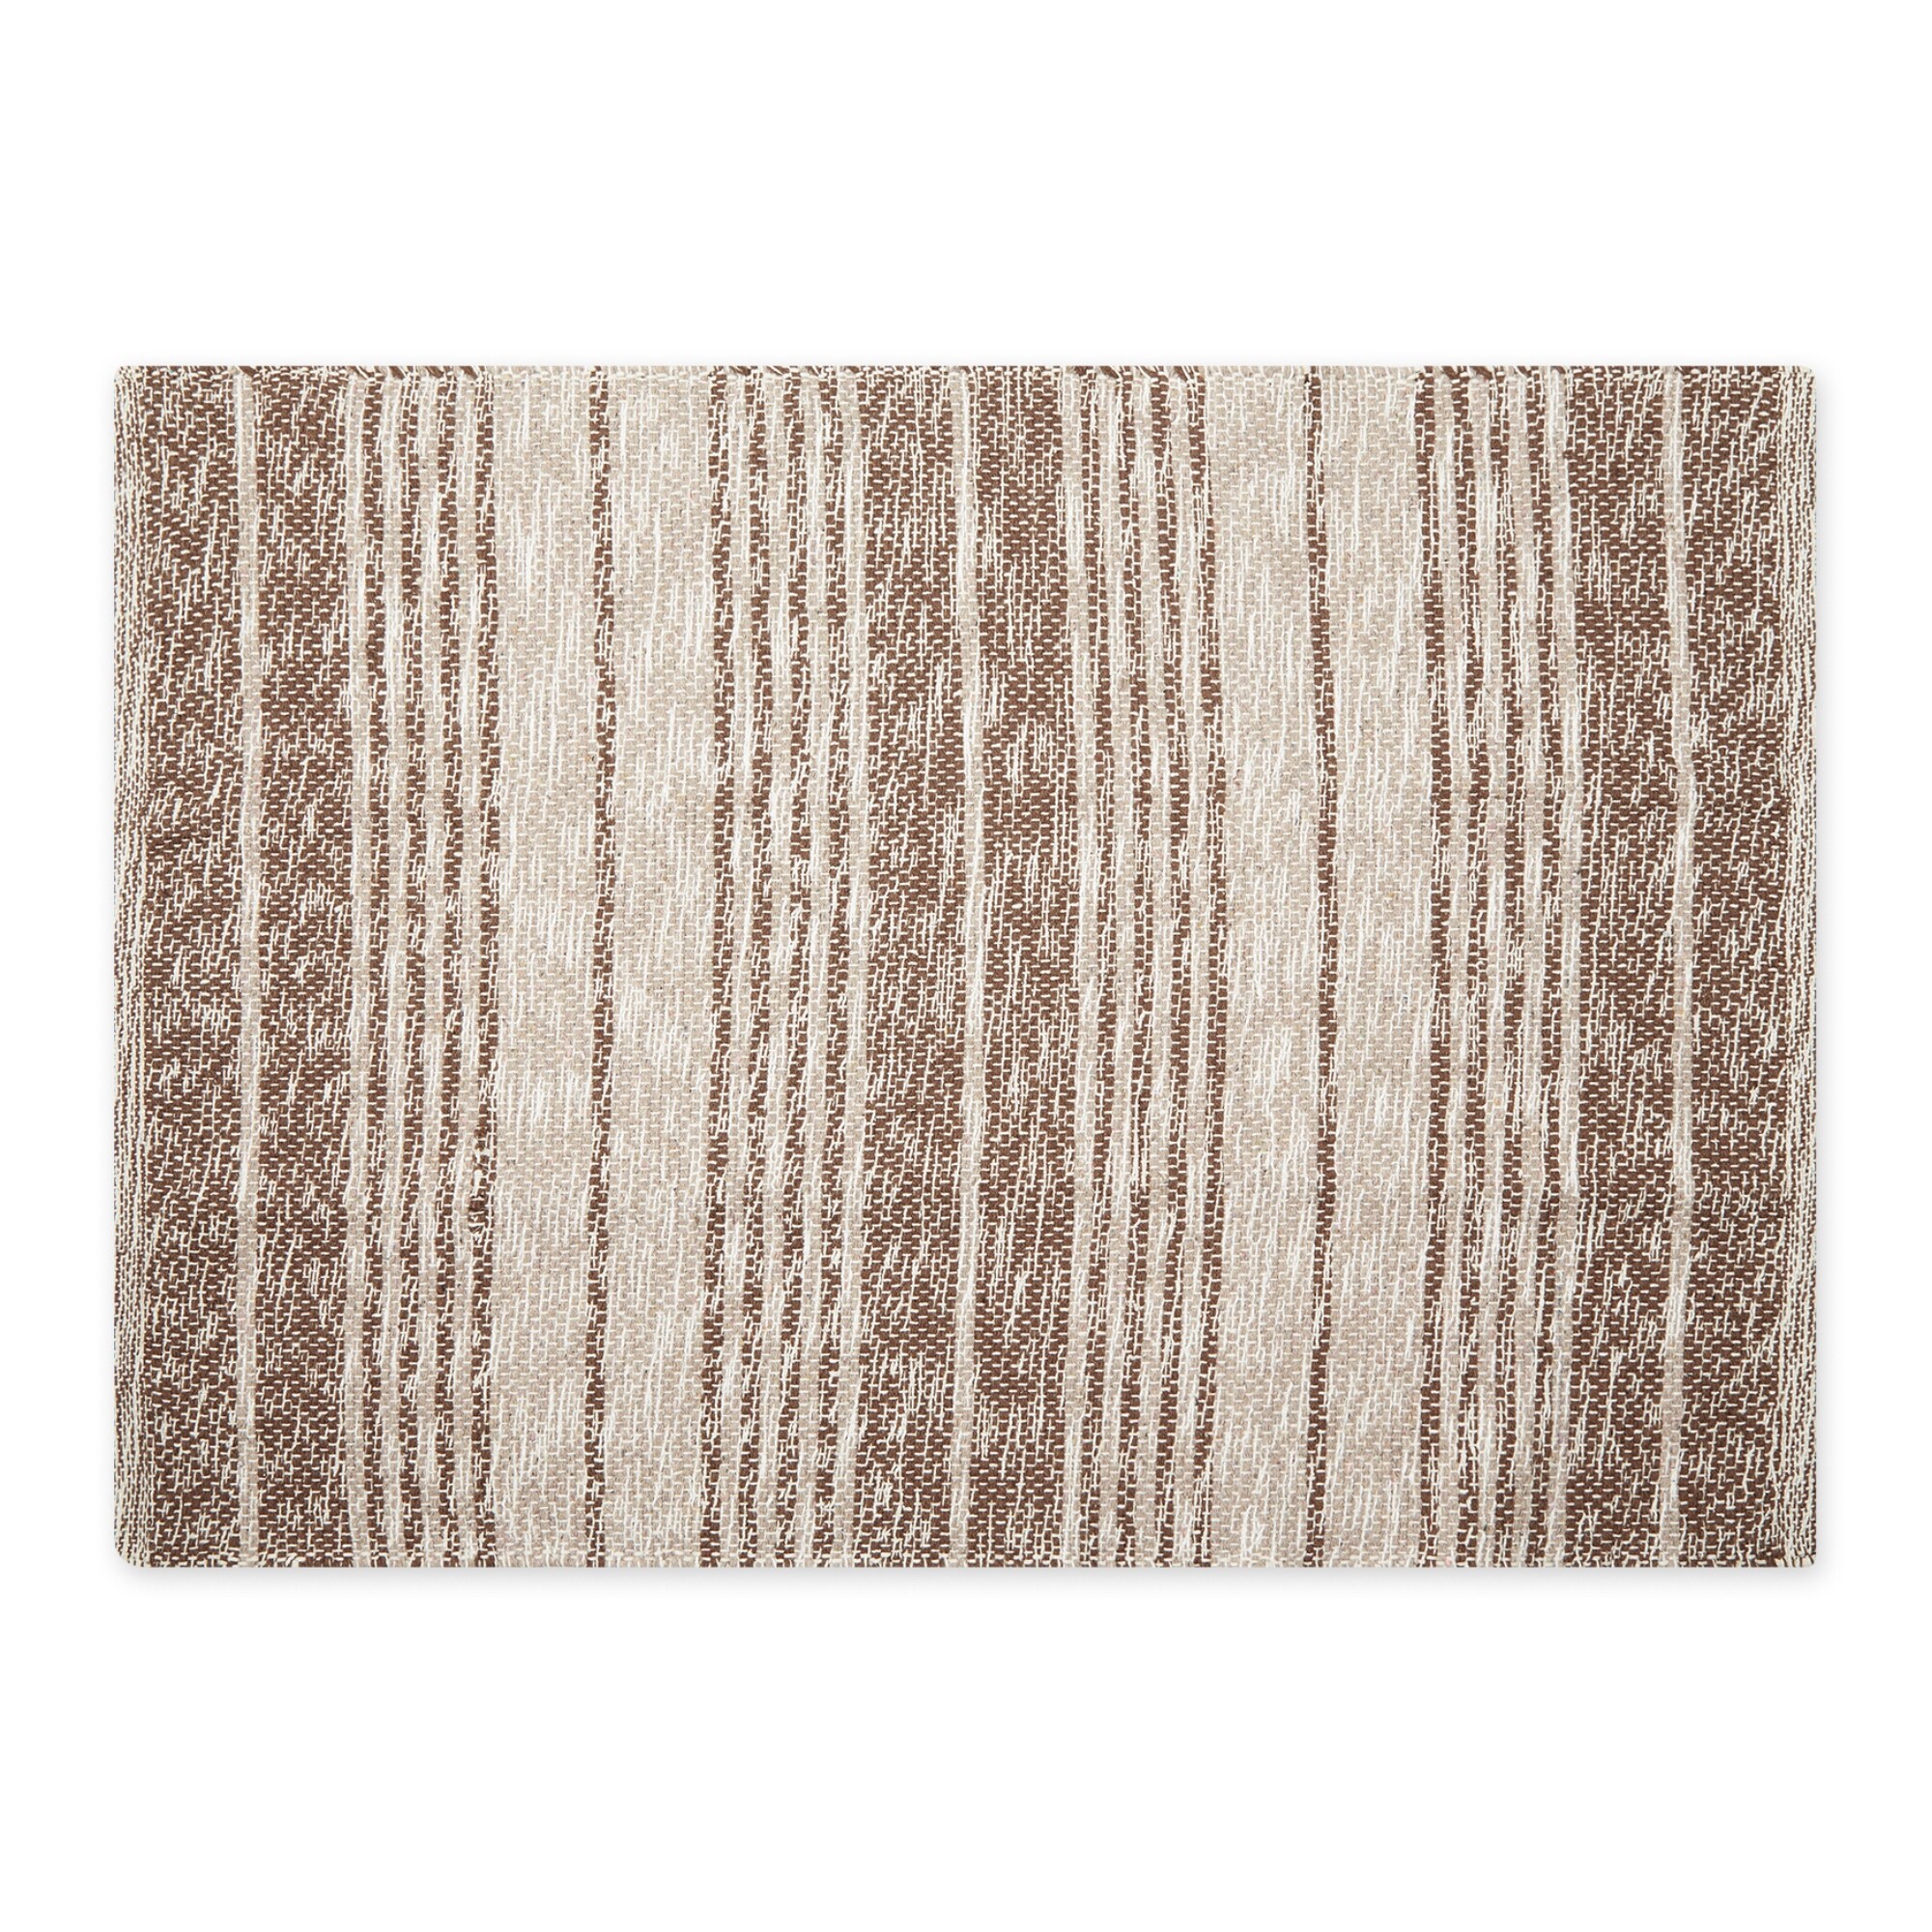 Variegated Stone Recycled Yarn Rug 2x3 ft